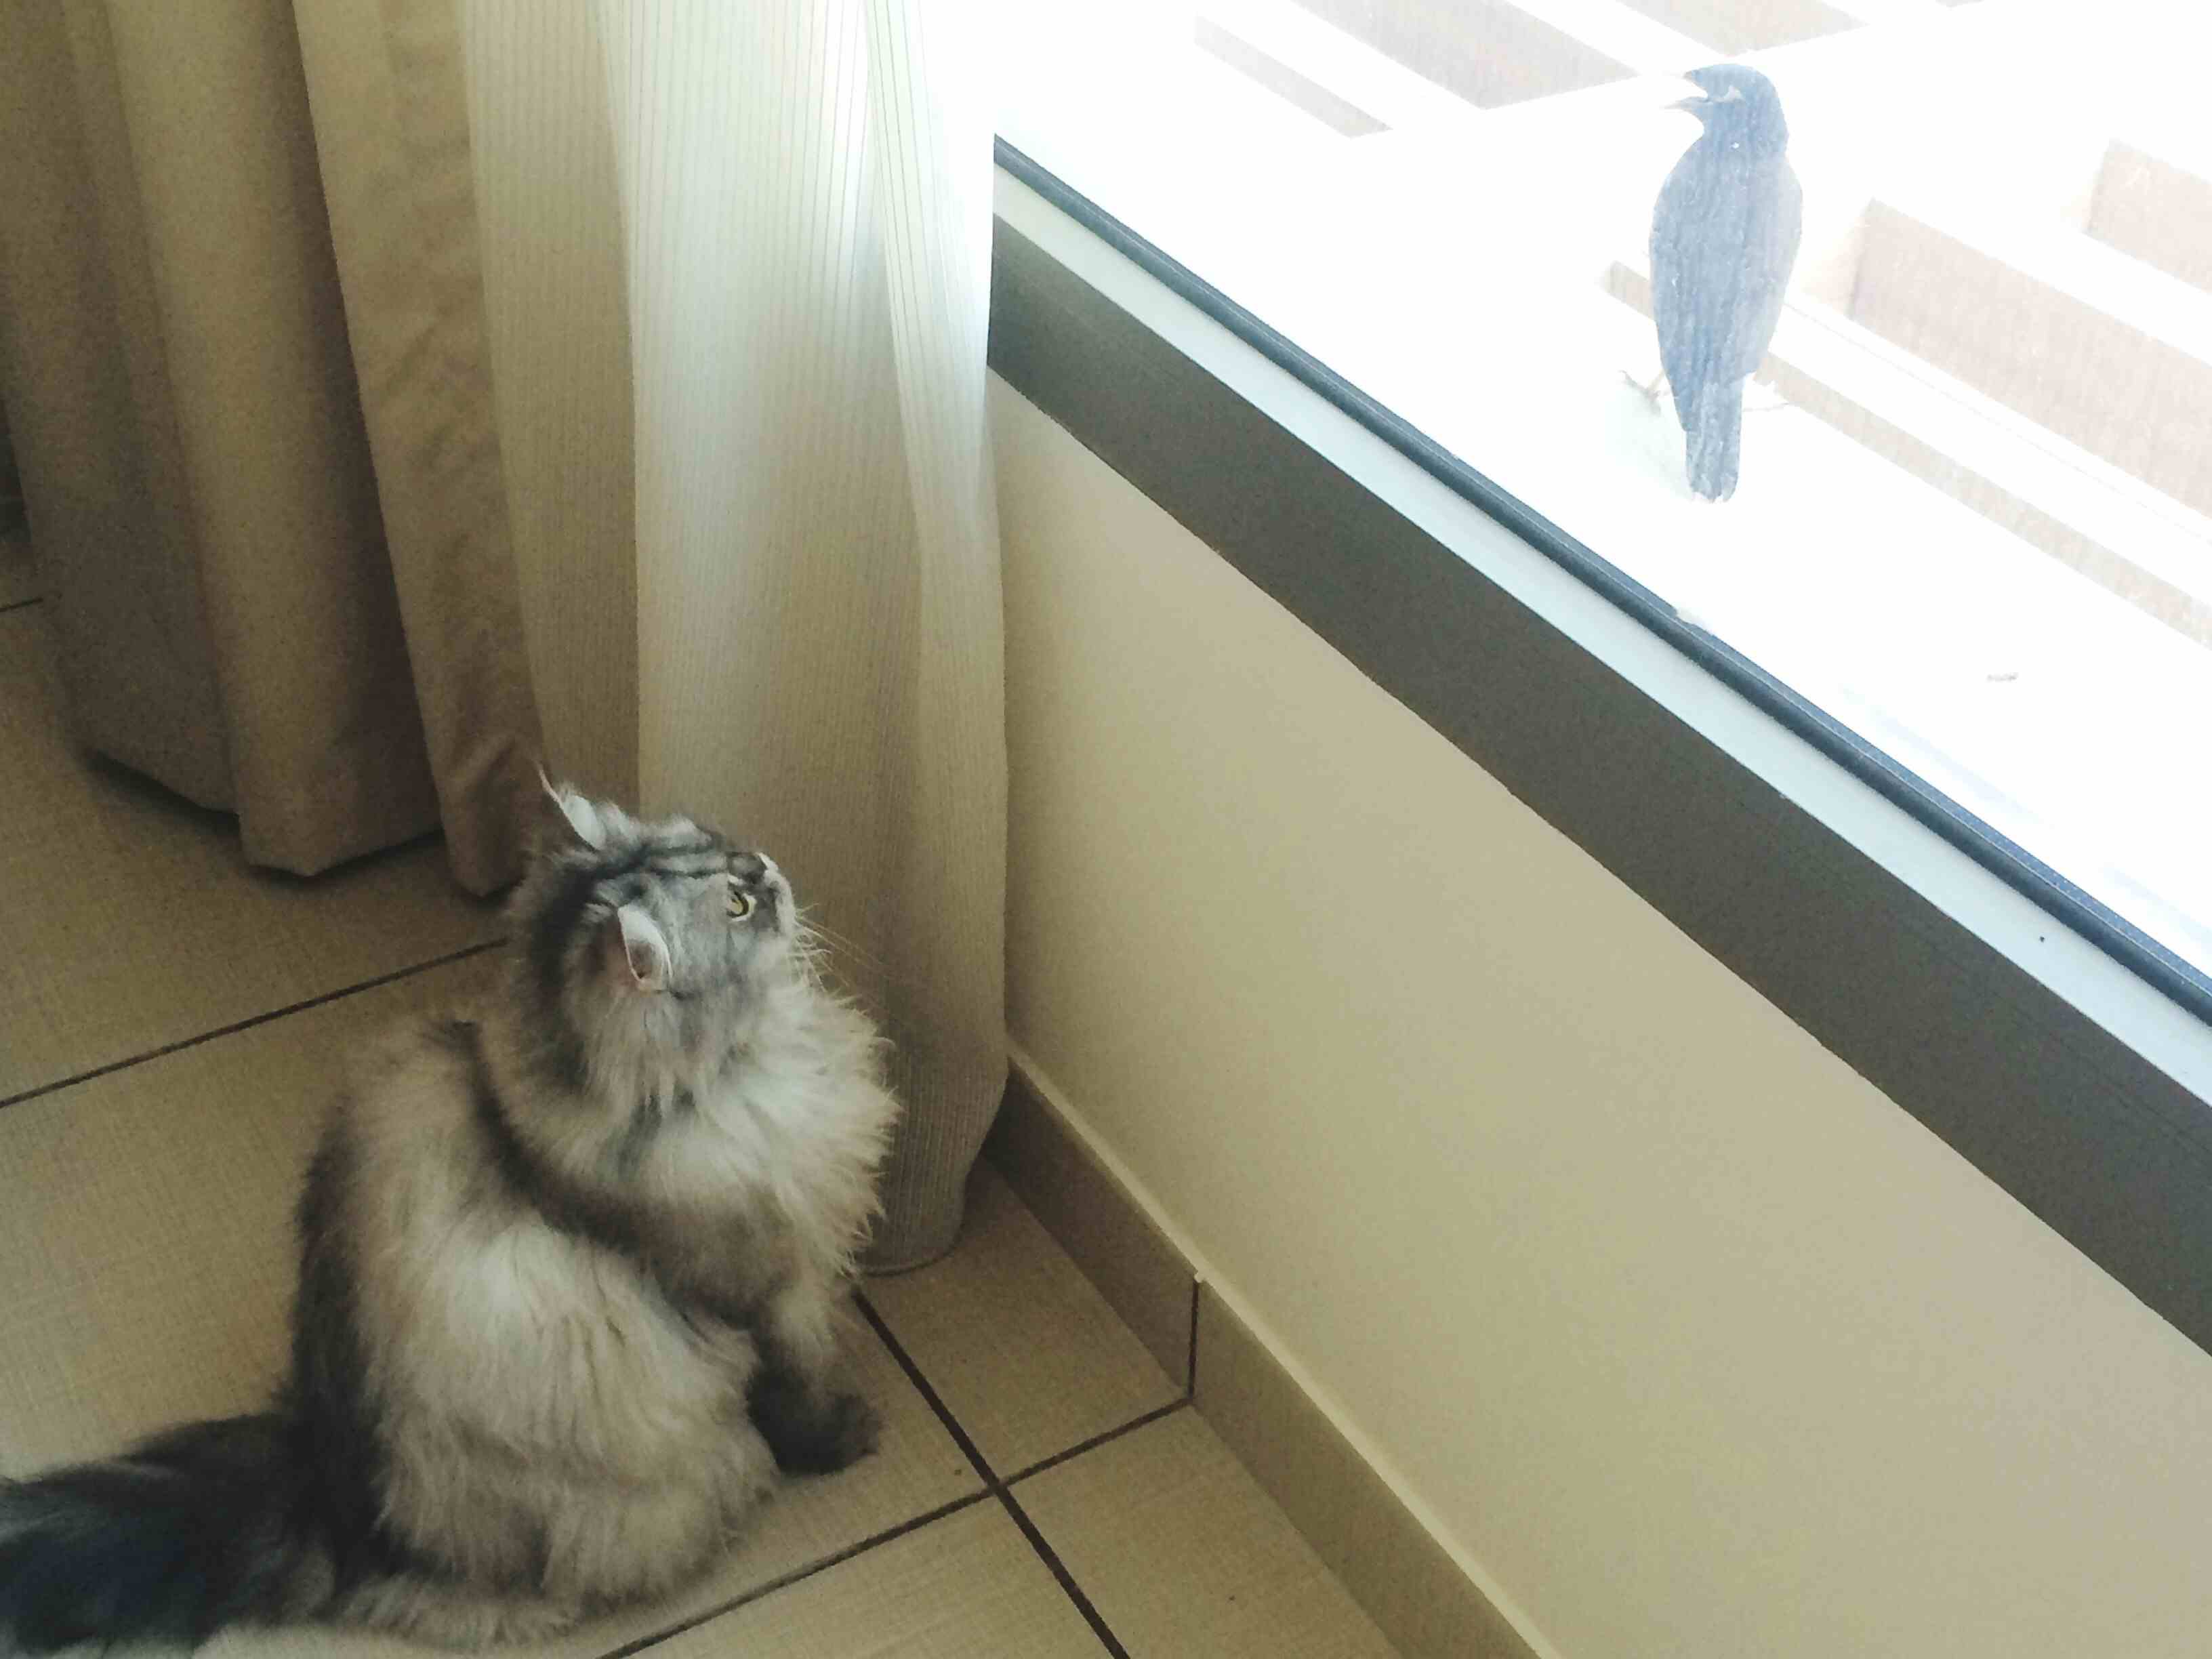 Maine Coon Cat looking at bird from window while sitting on floor